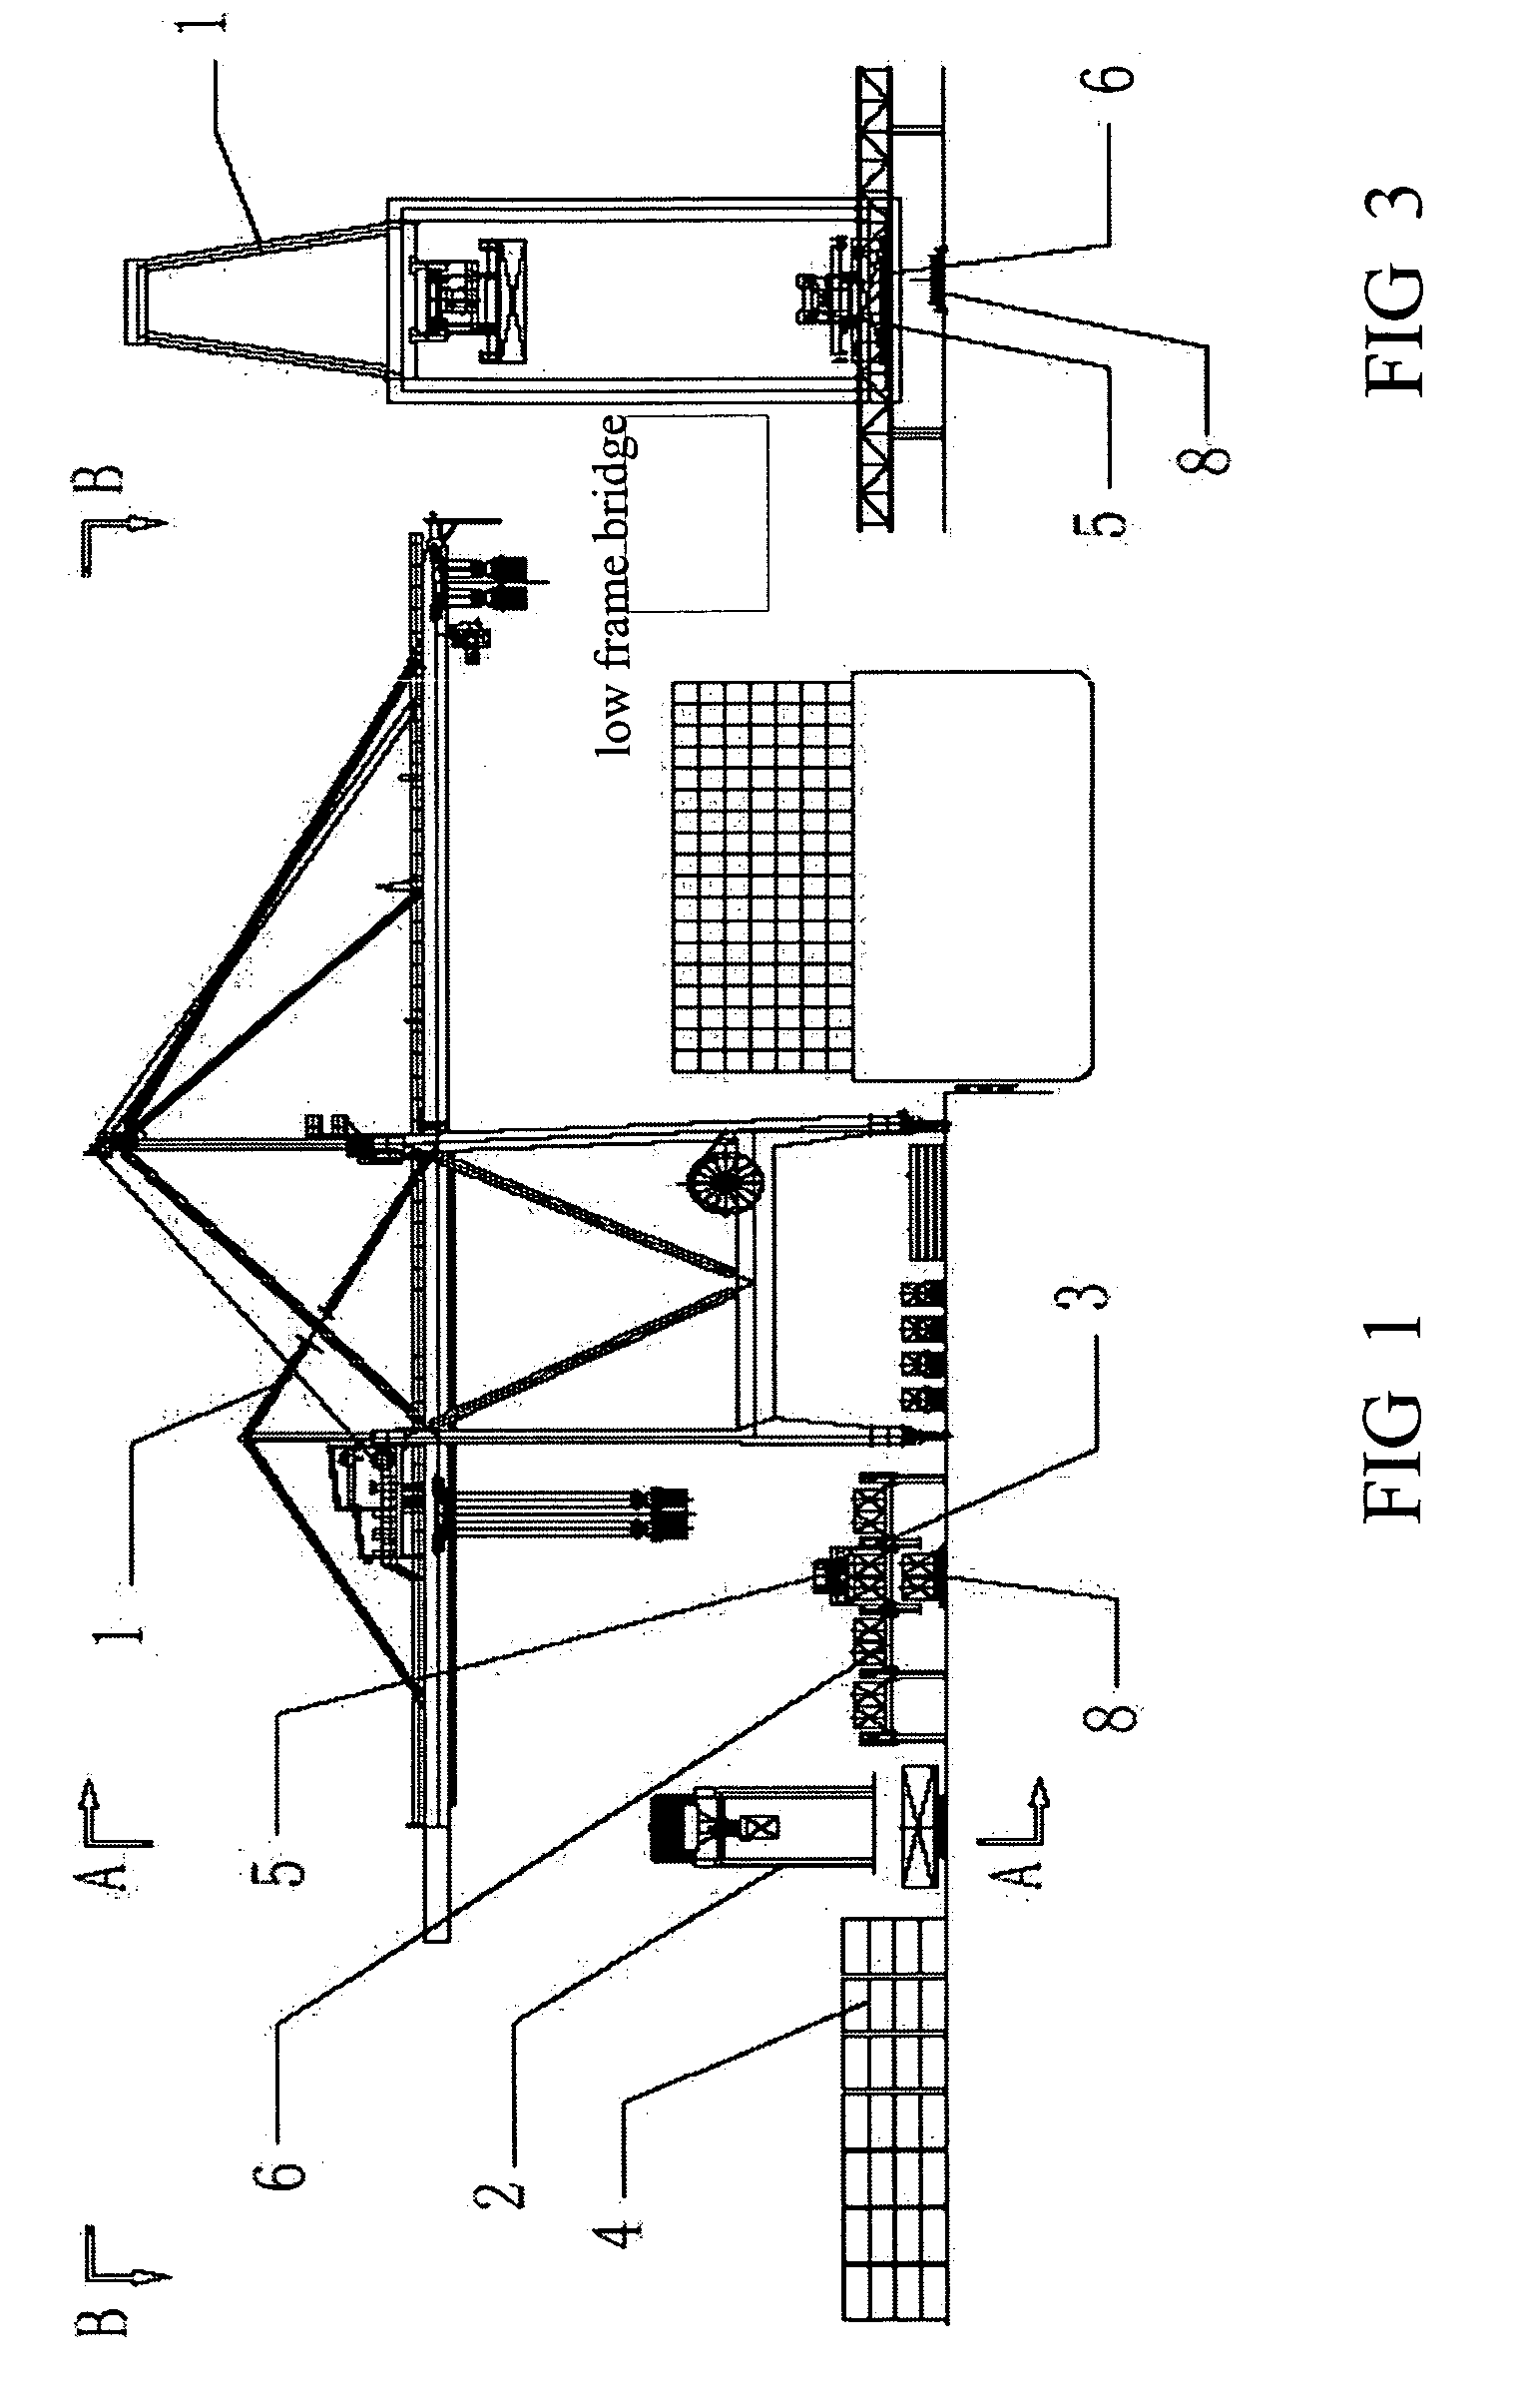 Carrier transferring load and unload system of low frame bridge type between the shore side crane and the stack field crane